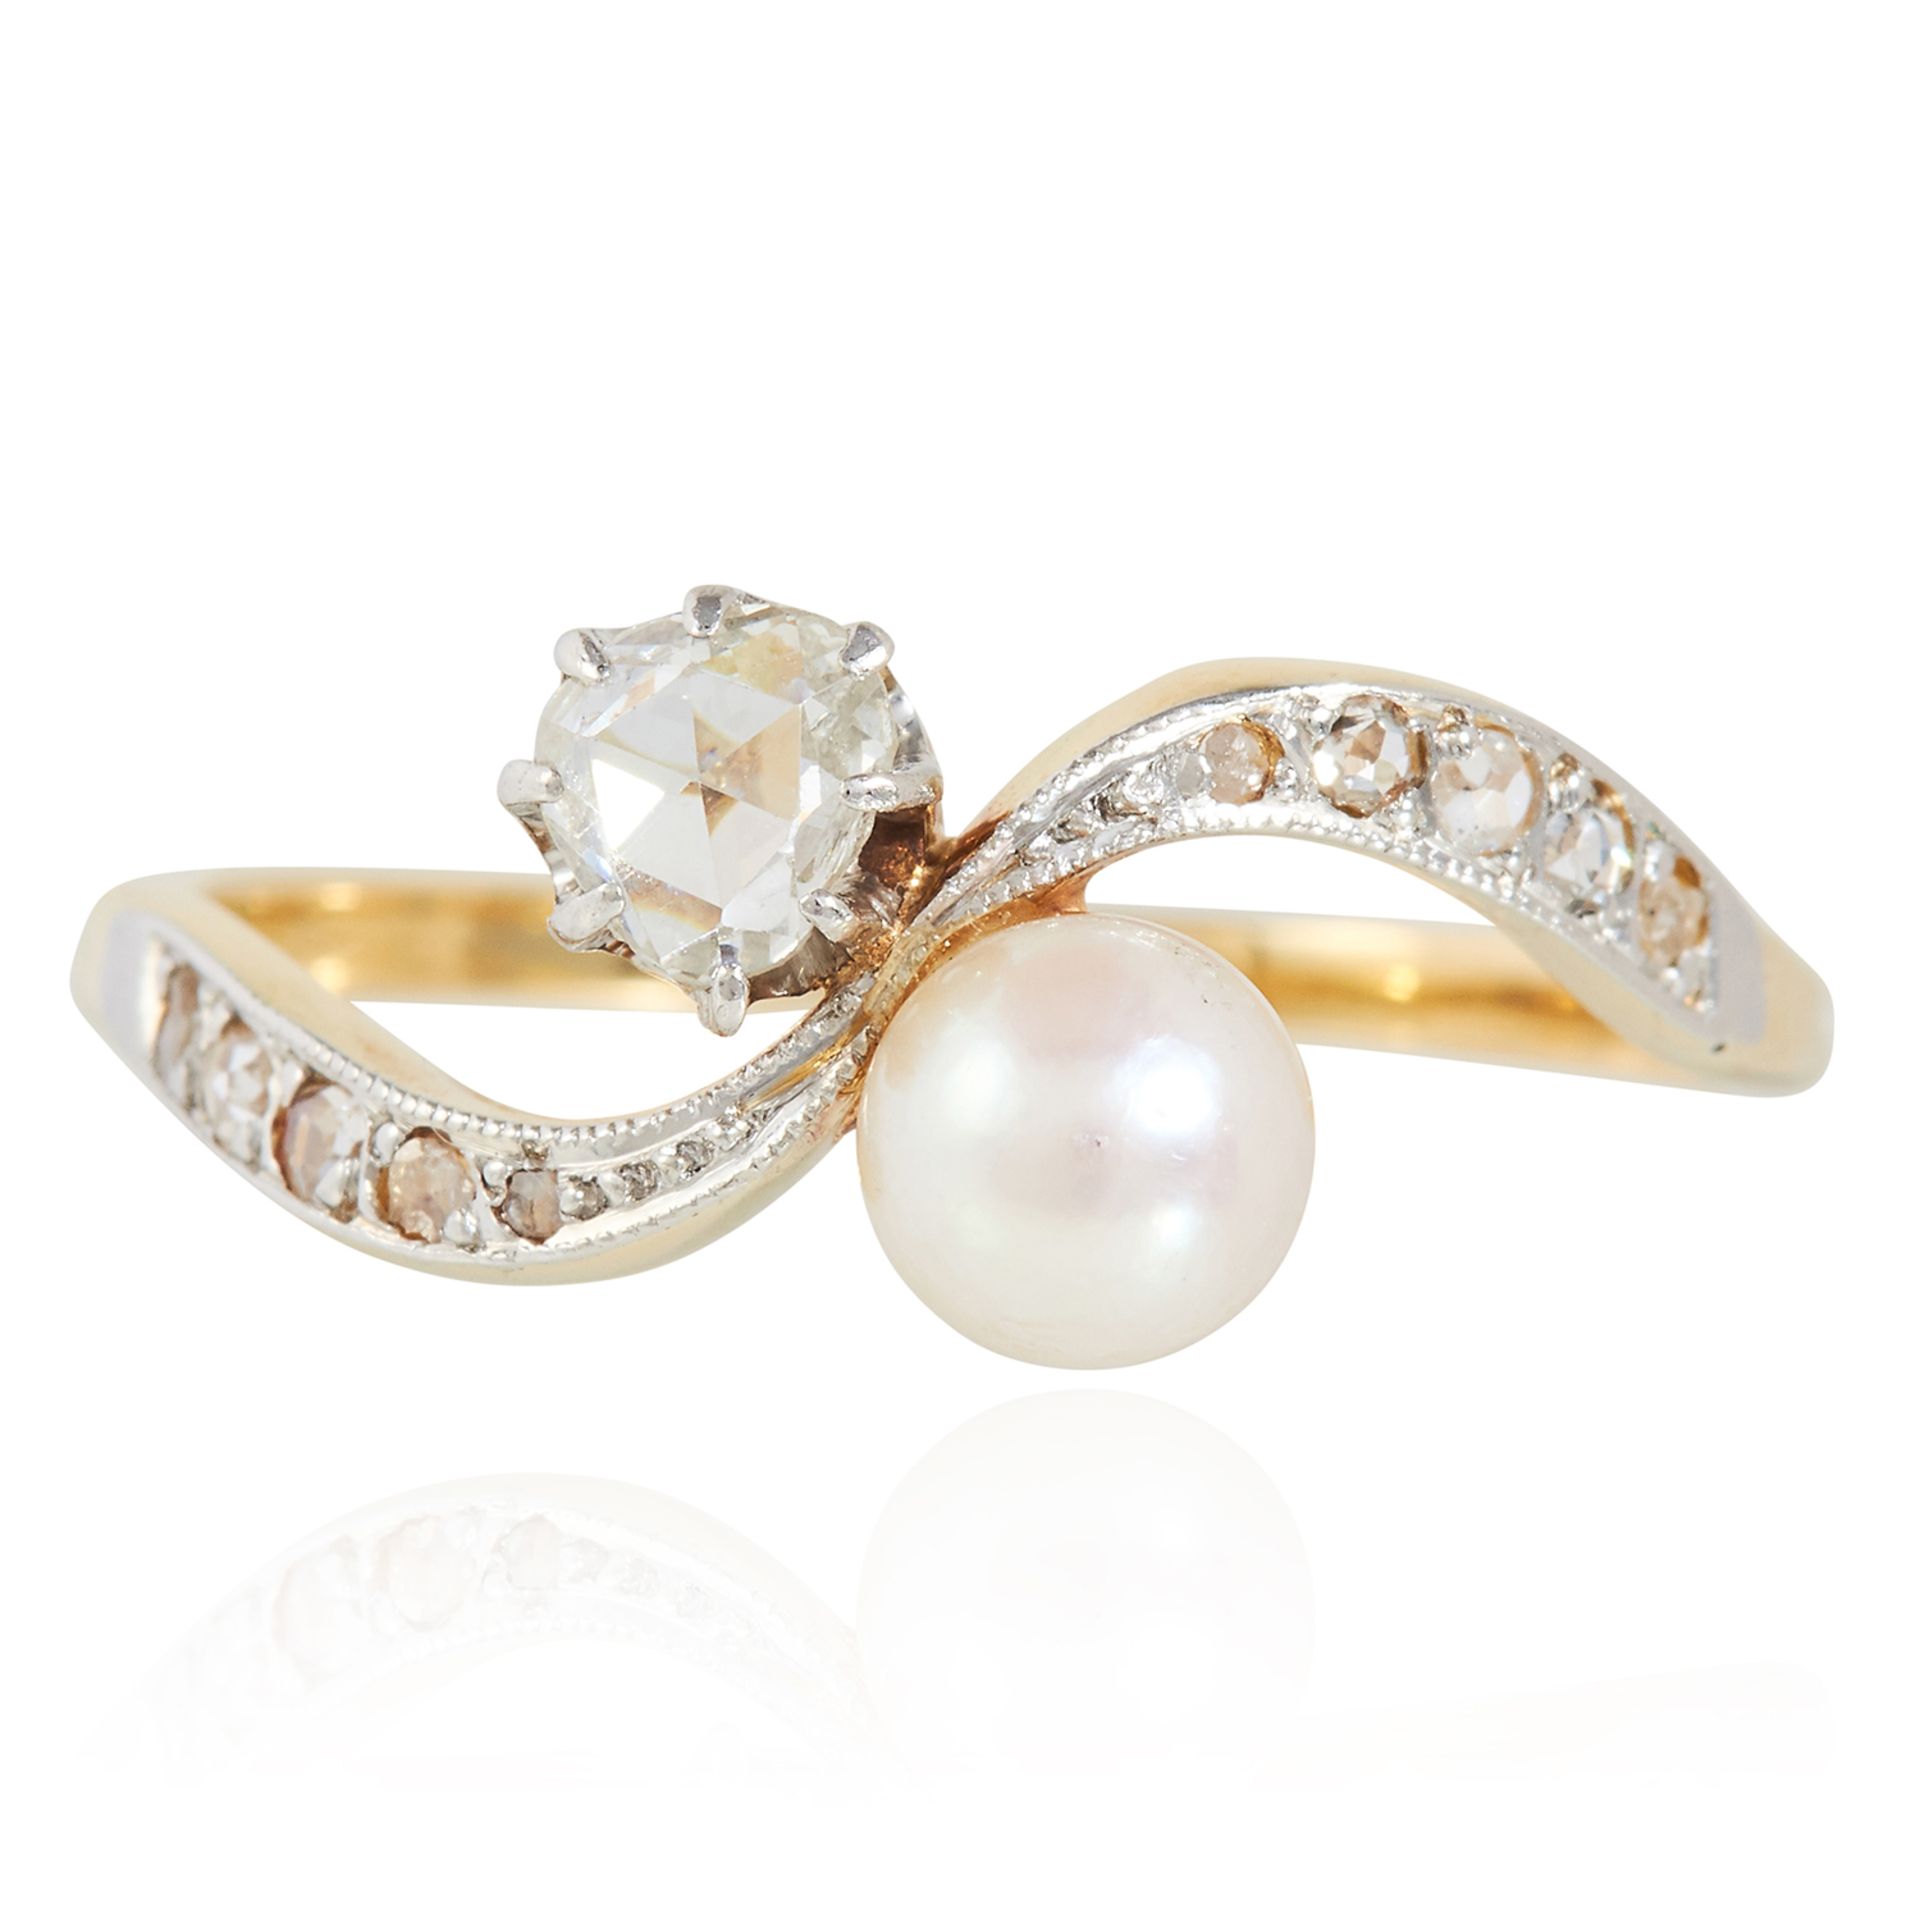 AN ANTIQUE PEARL AND DIAMOND TOI ET MOI RING in high carat yellow gold, set with juxtaposed pearl